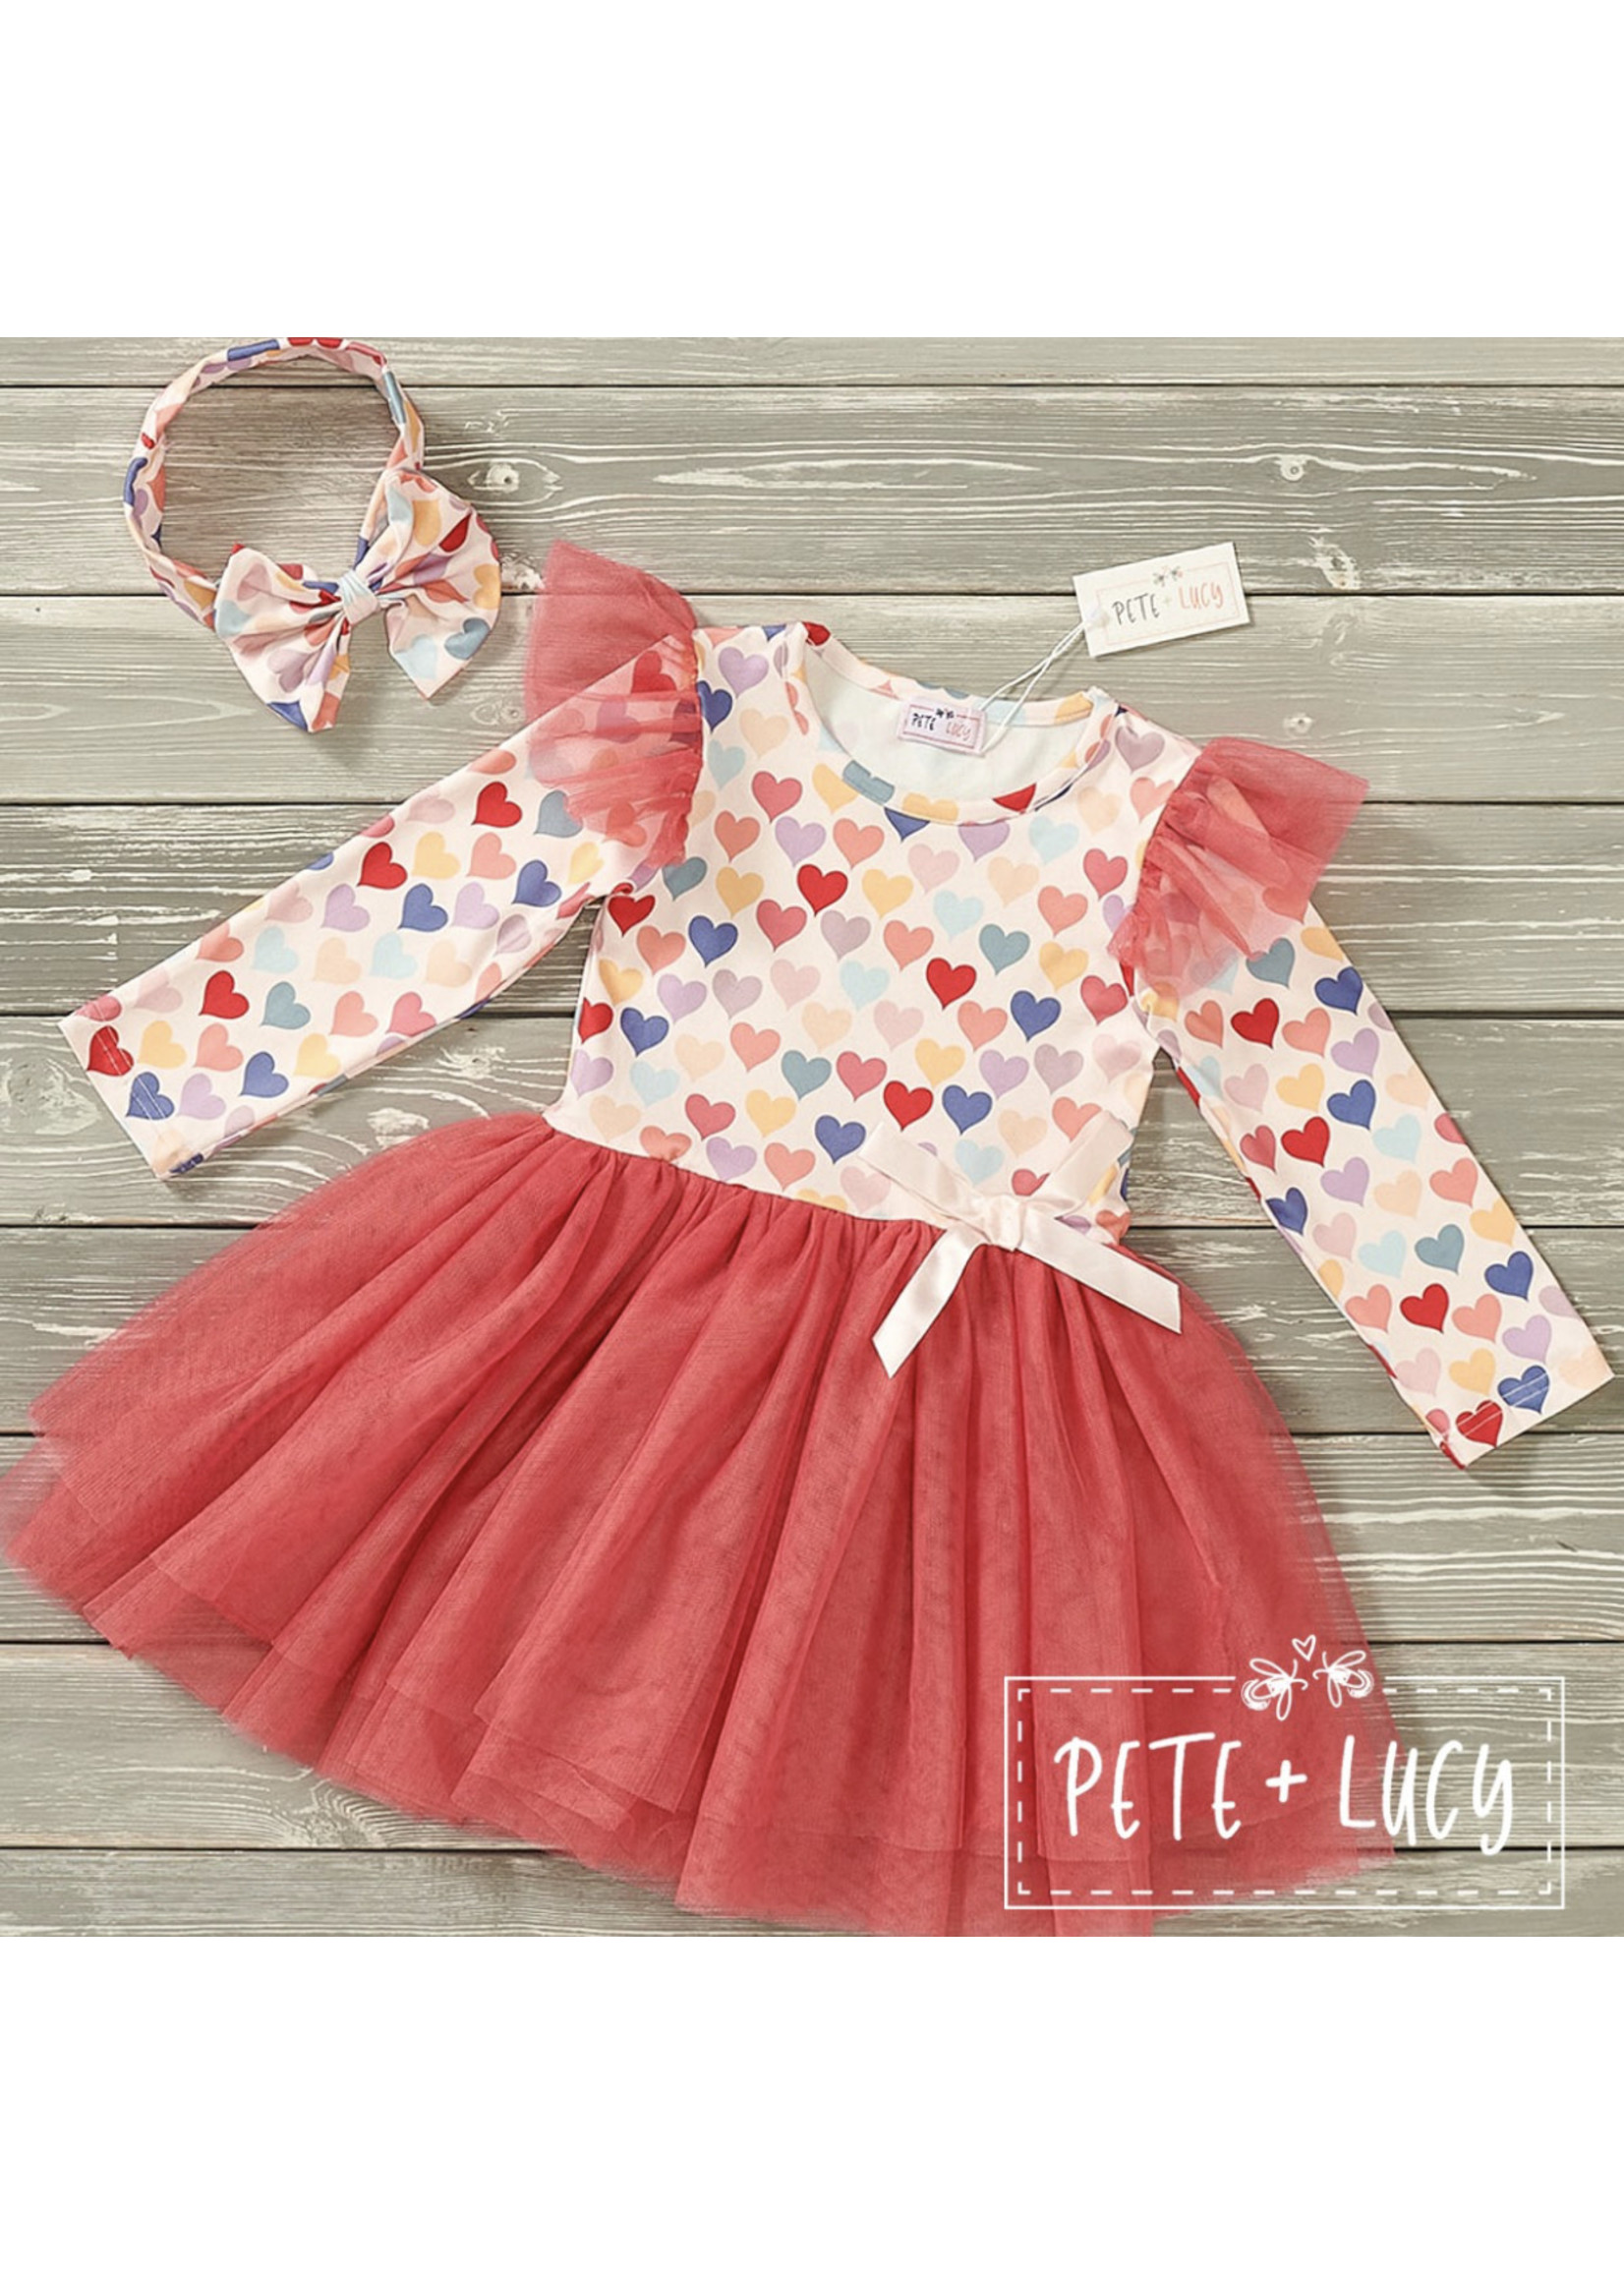 Pete & Lucy Pastel Hearts Toddler Tulle Dress